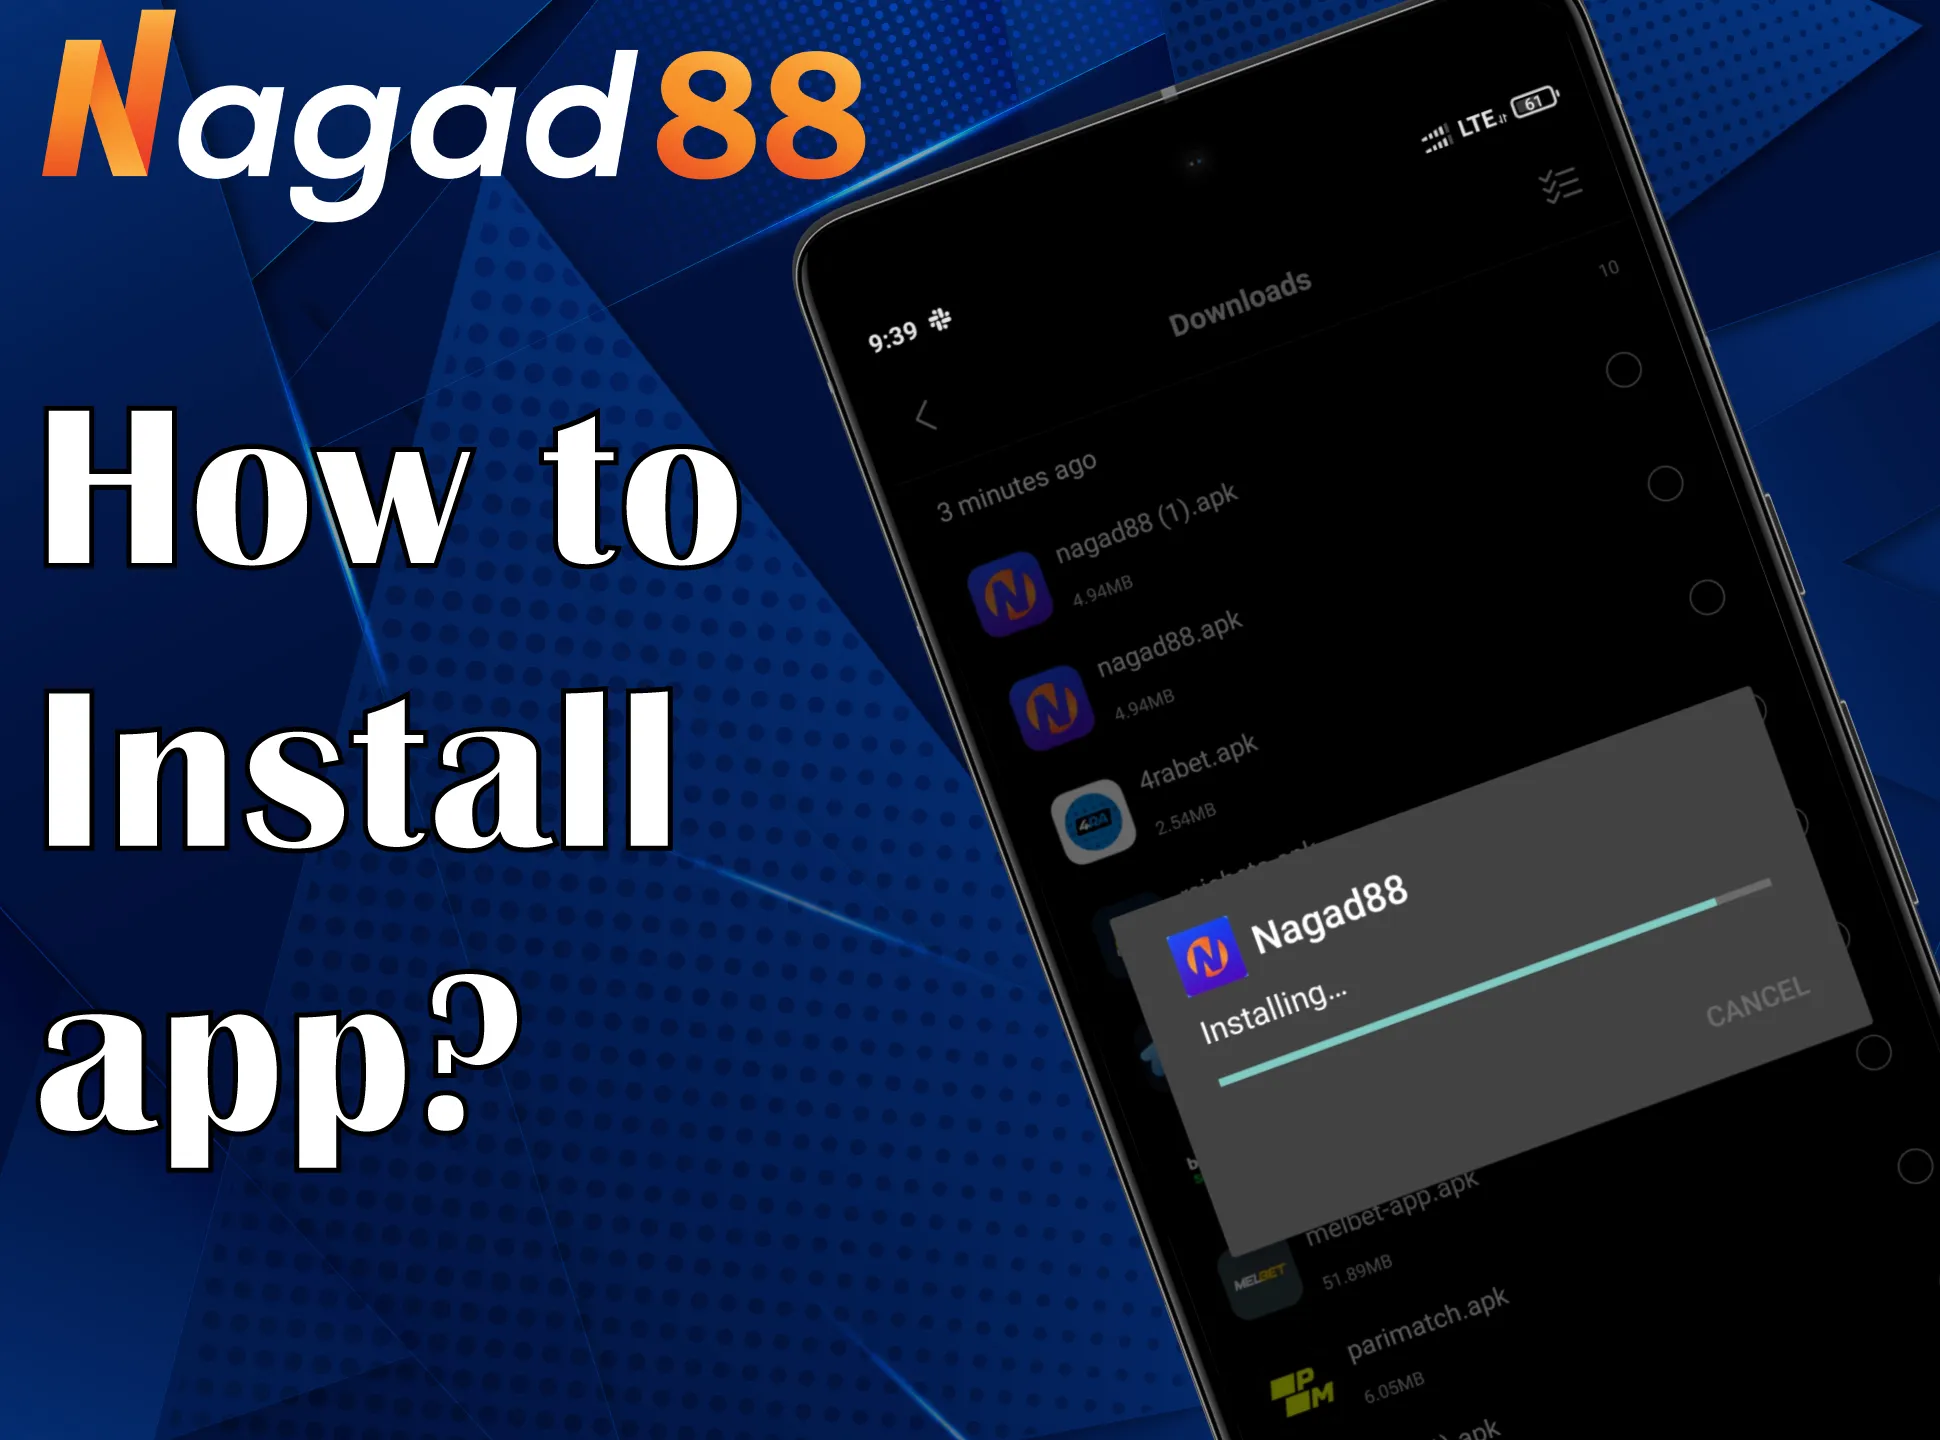 With these instructions, it's easy to install the Nagad88 app.